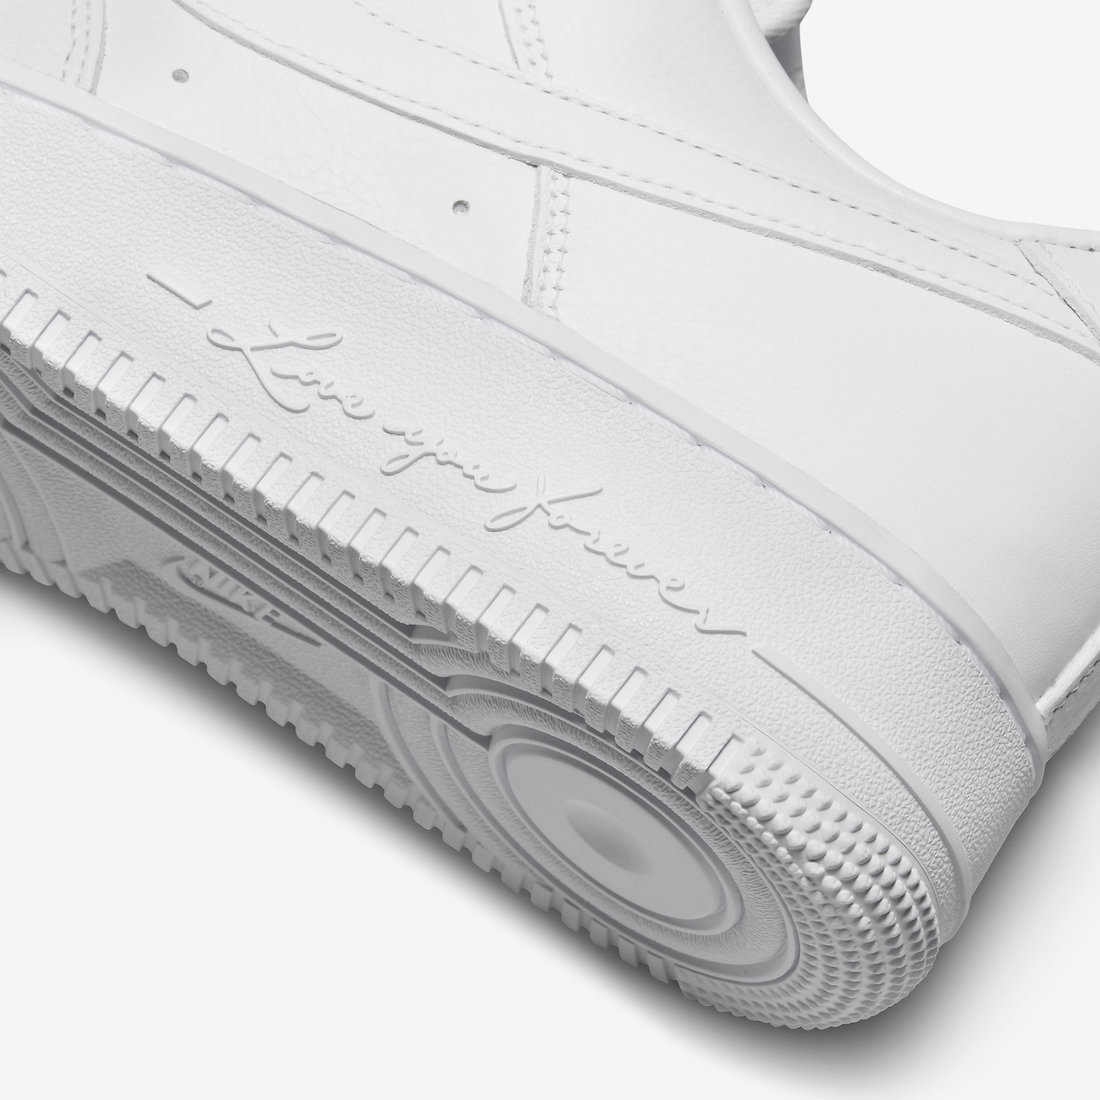 Official Look At Drake’s NOCTA x Nike Air Force 1 Low “Certified Lover Boy”